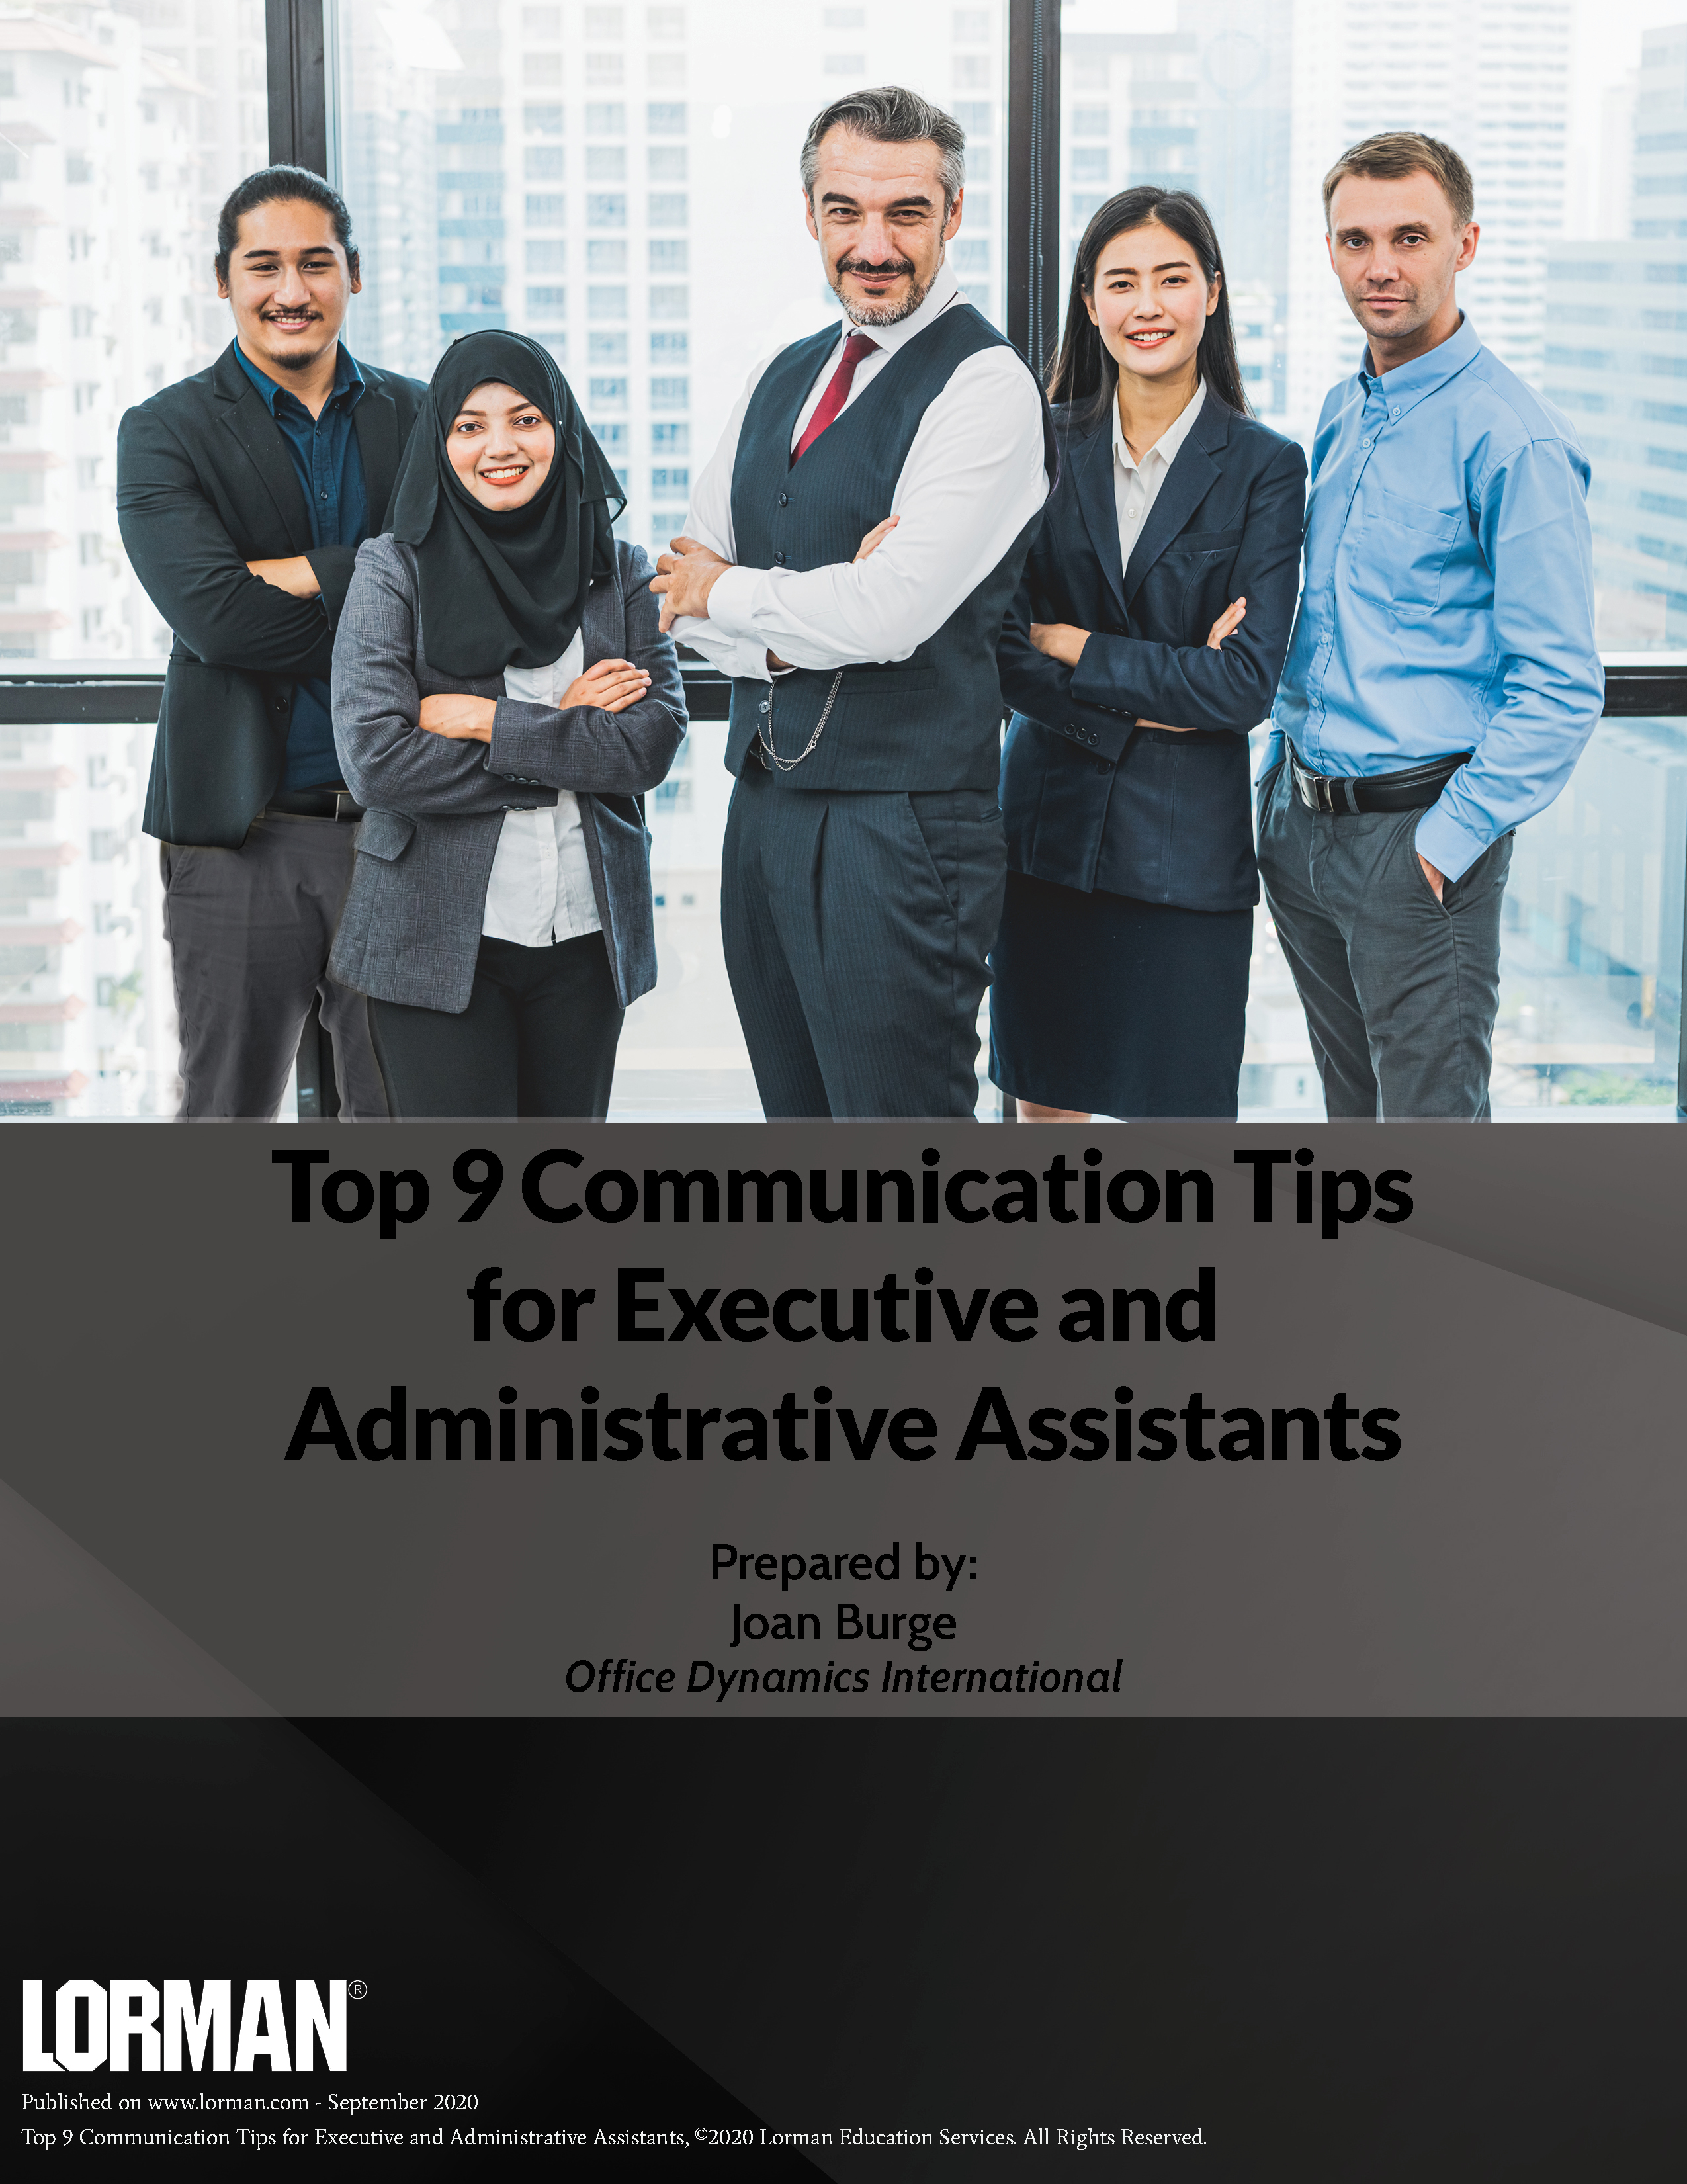 Top 9 Communication Tips for Executive and Administrative Assistants